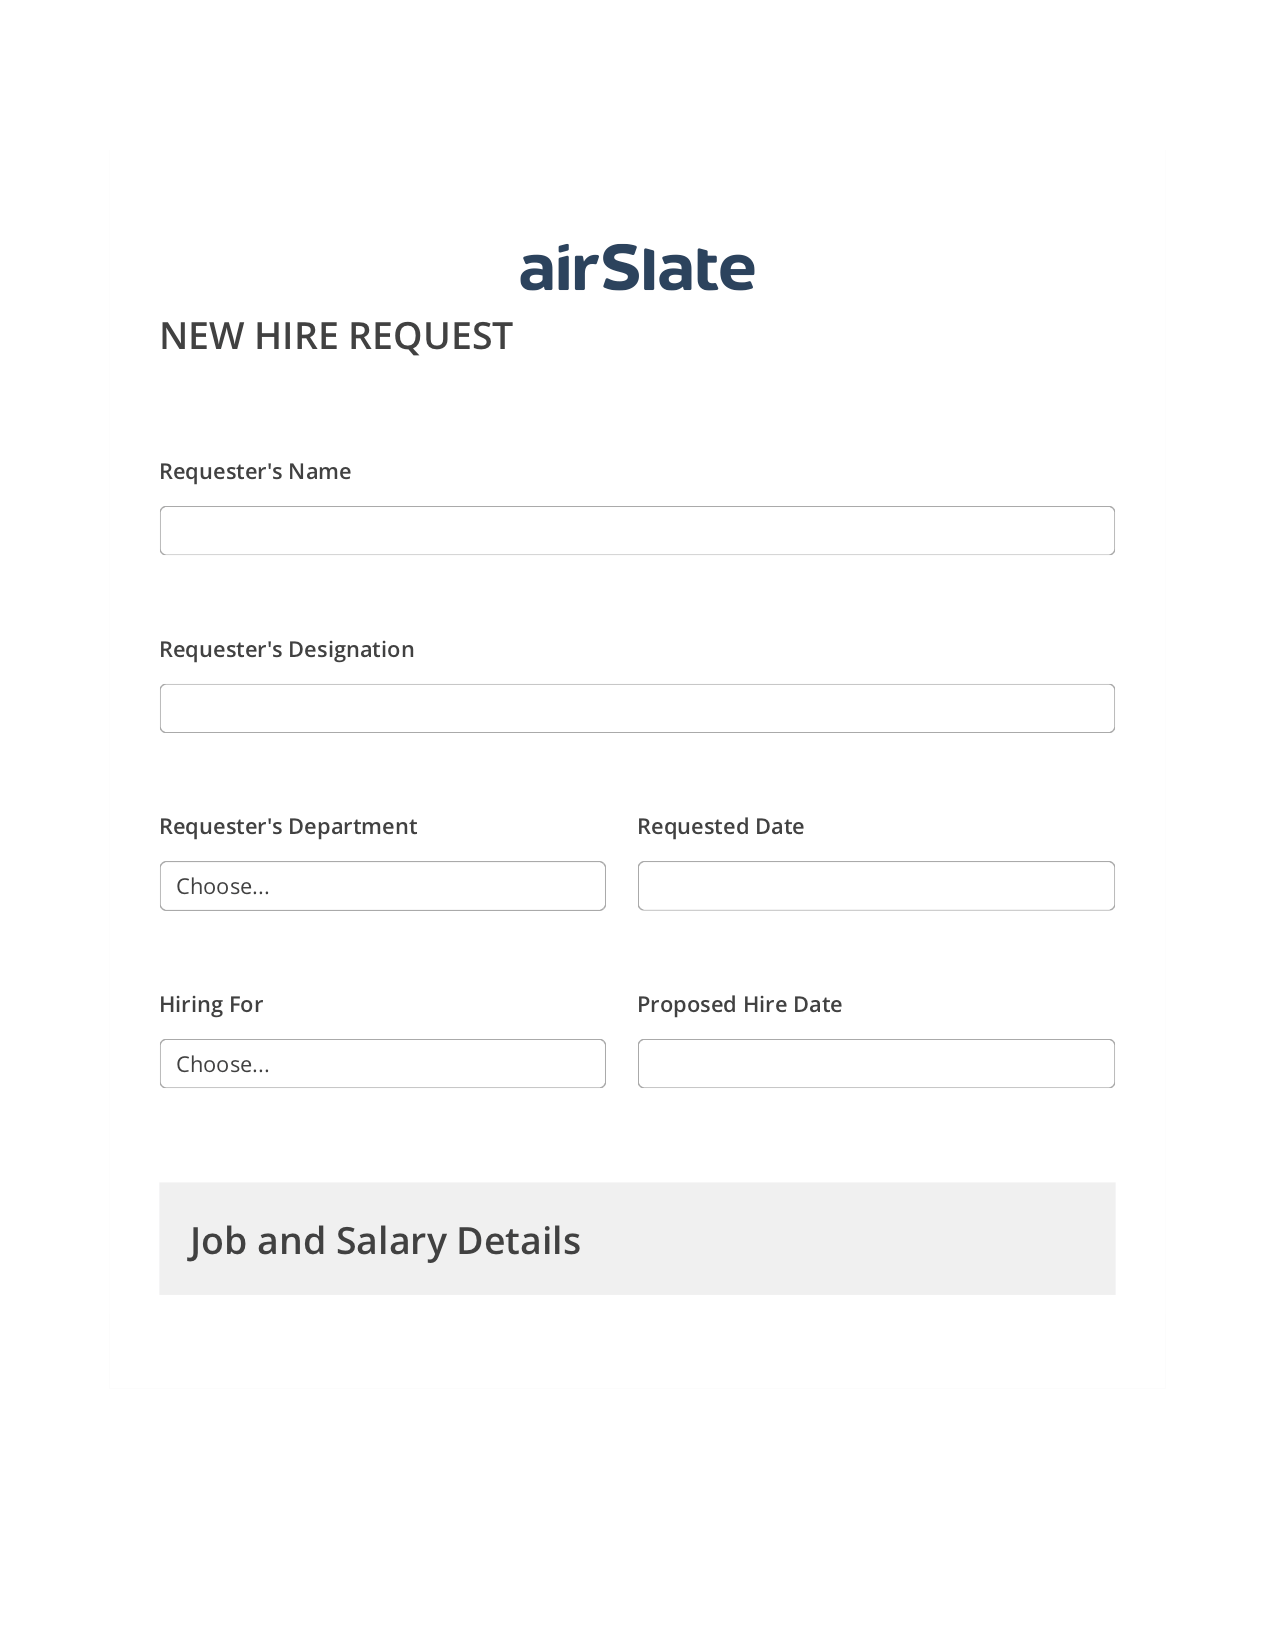 Hiring Request Workflow Pre-fill from CSV File Bot, Send a Slate to MS Dynamics 365 Contact Bot, Email Notification Postfinish Bot